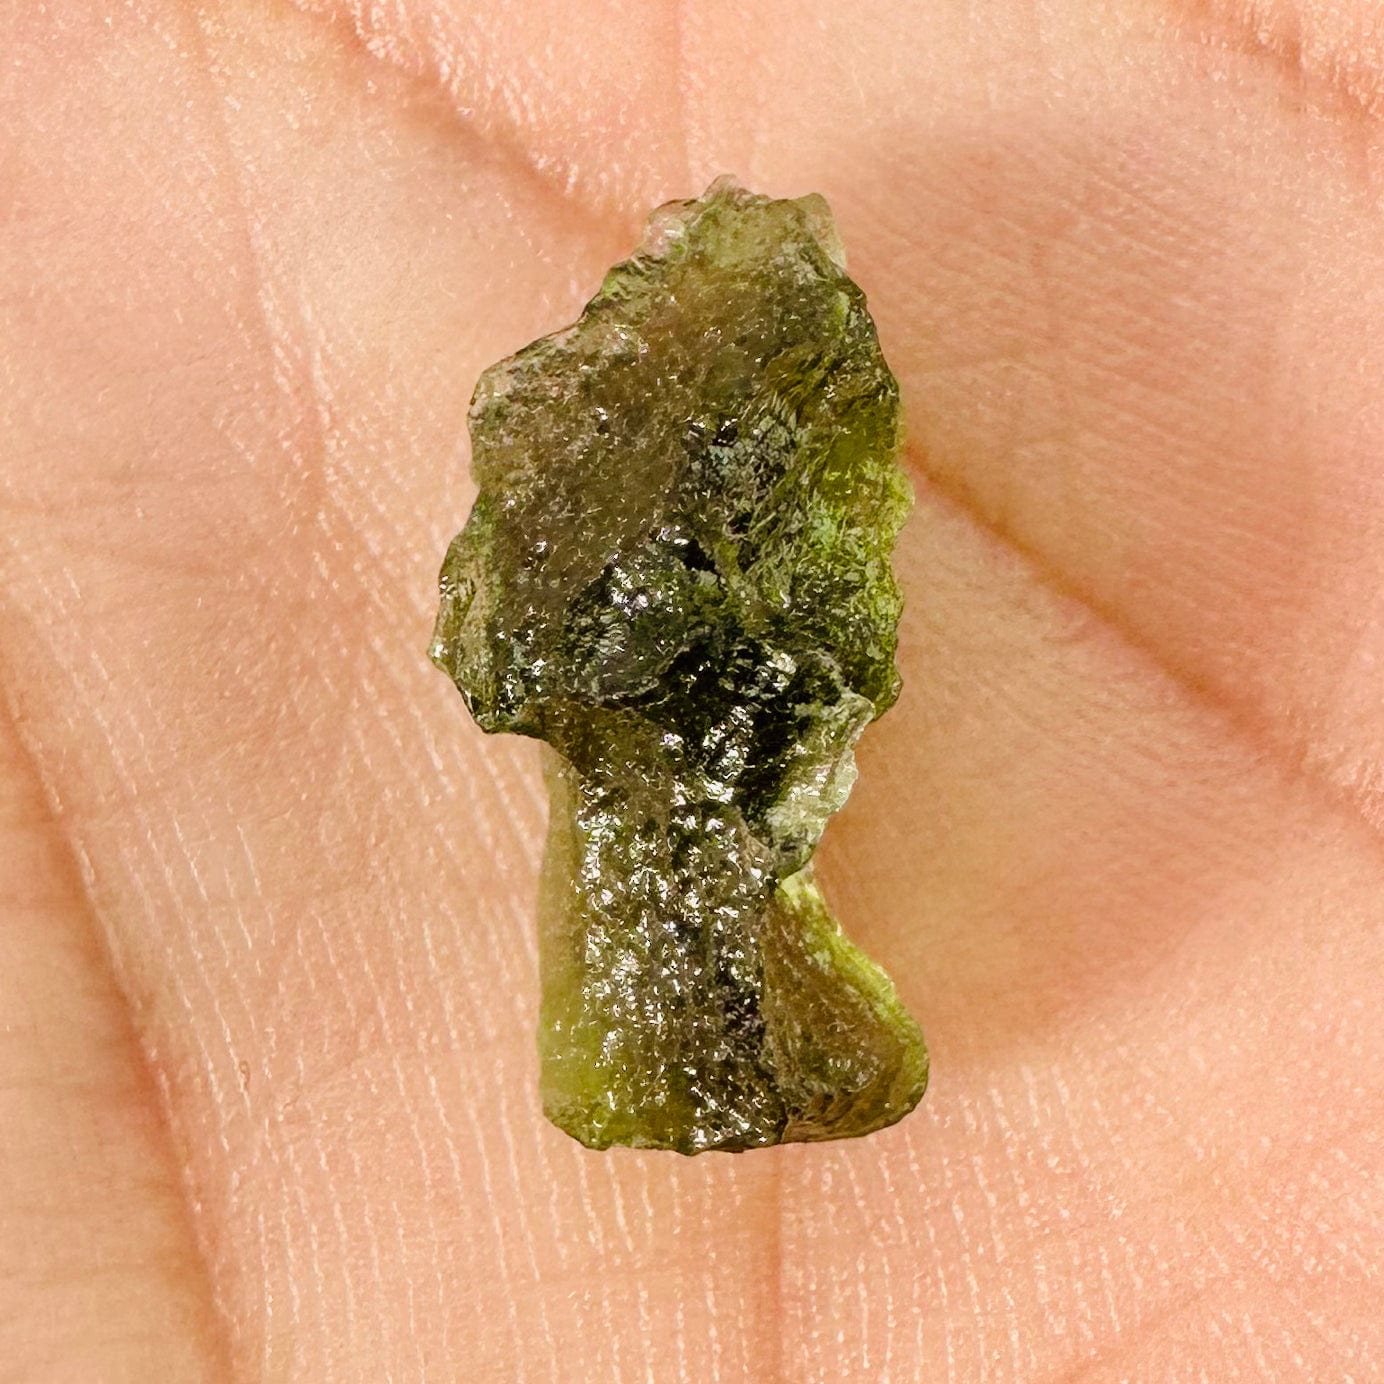 Up close view of 0.9 gram (option B) Moldavite piece displayed in palm of woman's hand. 